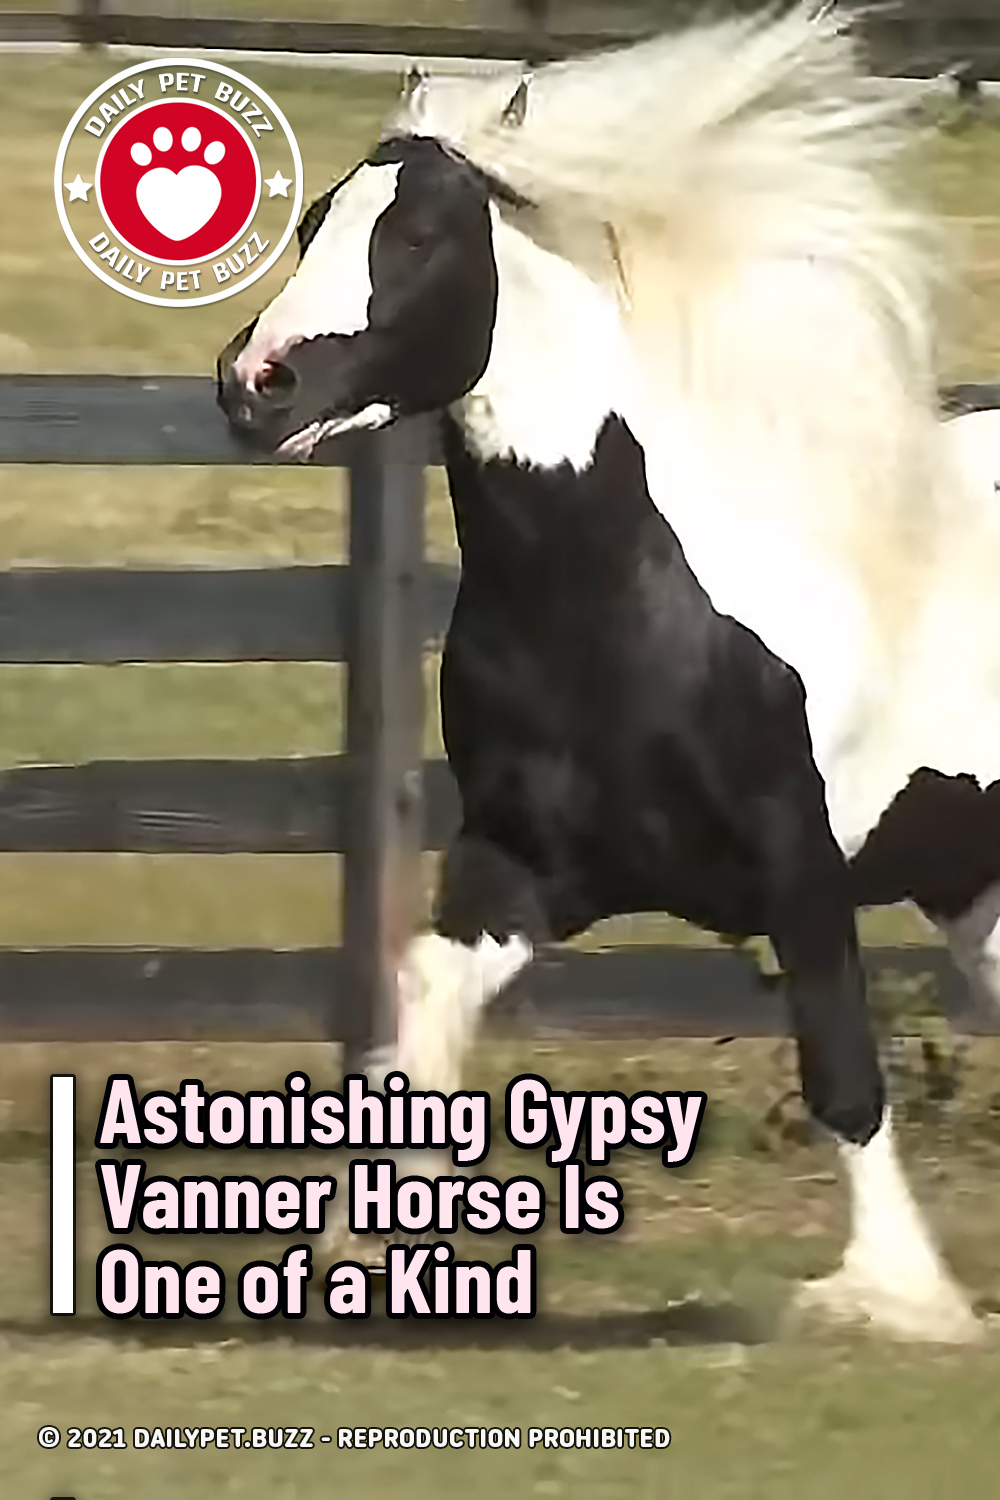 Astonishing Gypsy Vanner Horse Is One of a Kind